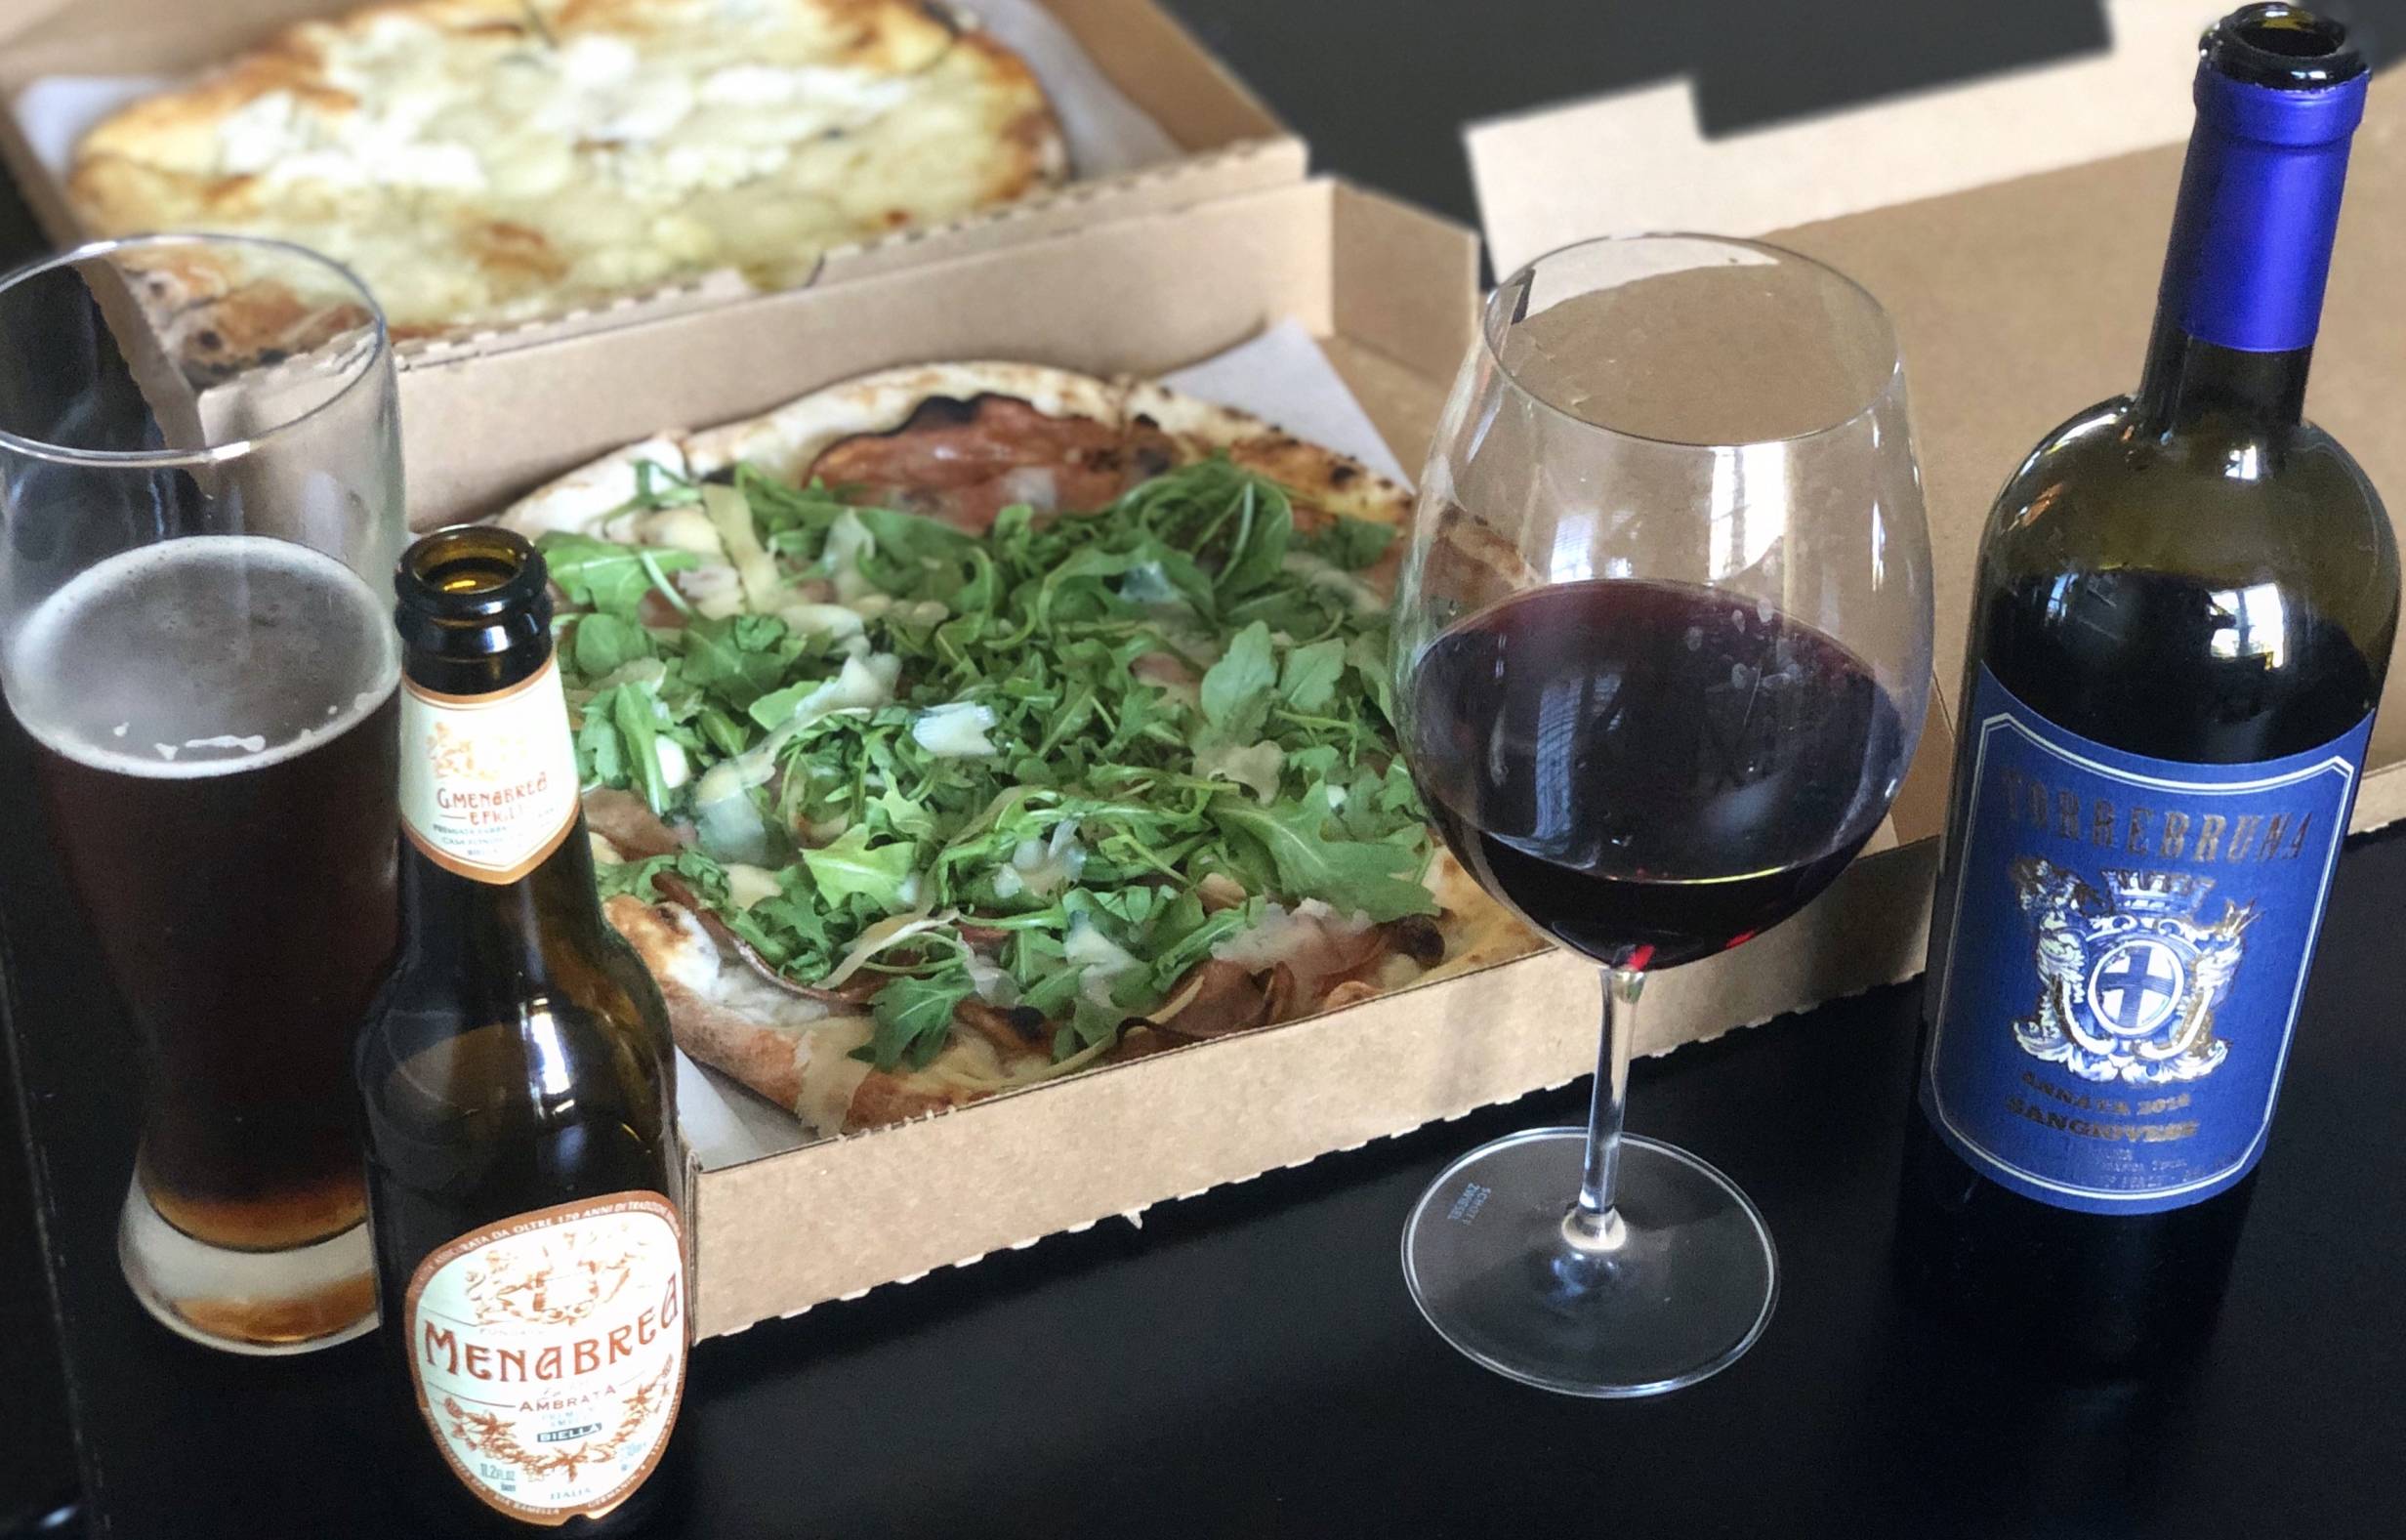 I picked up pizza and drinks from Pizzeria Antica, and it was wondrous